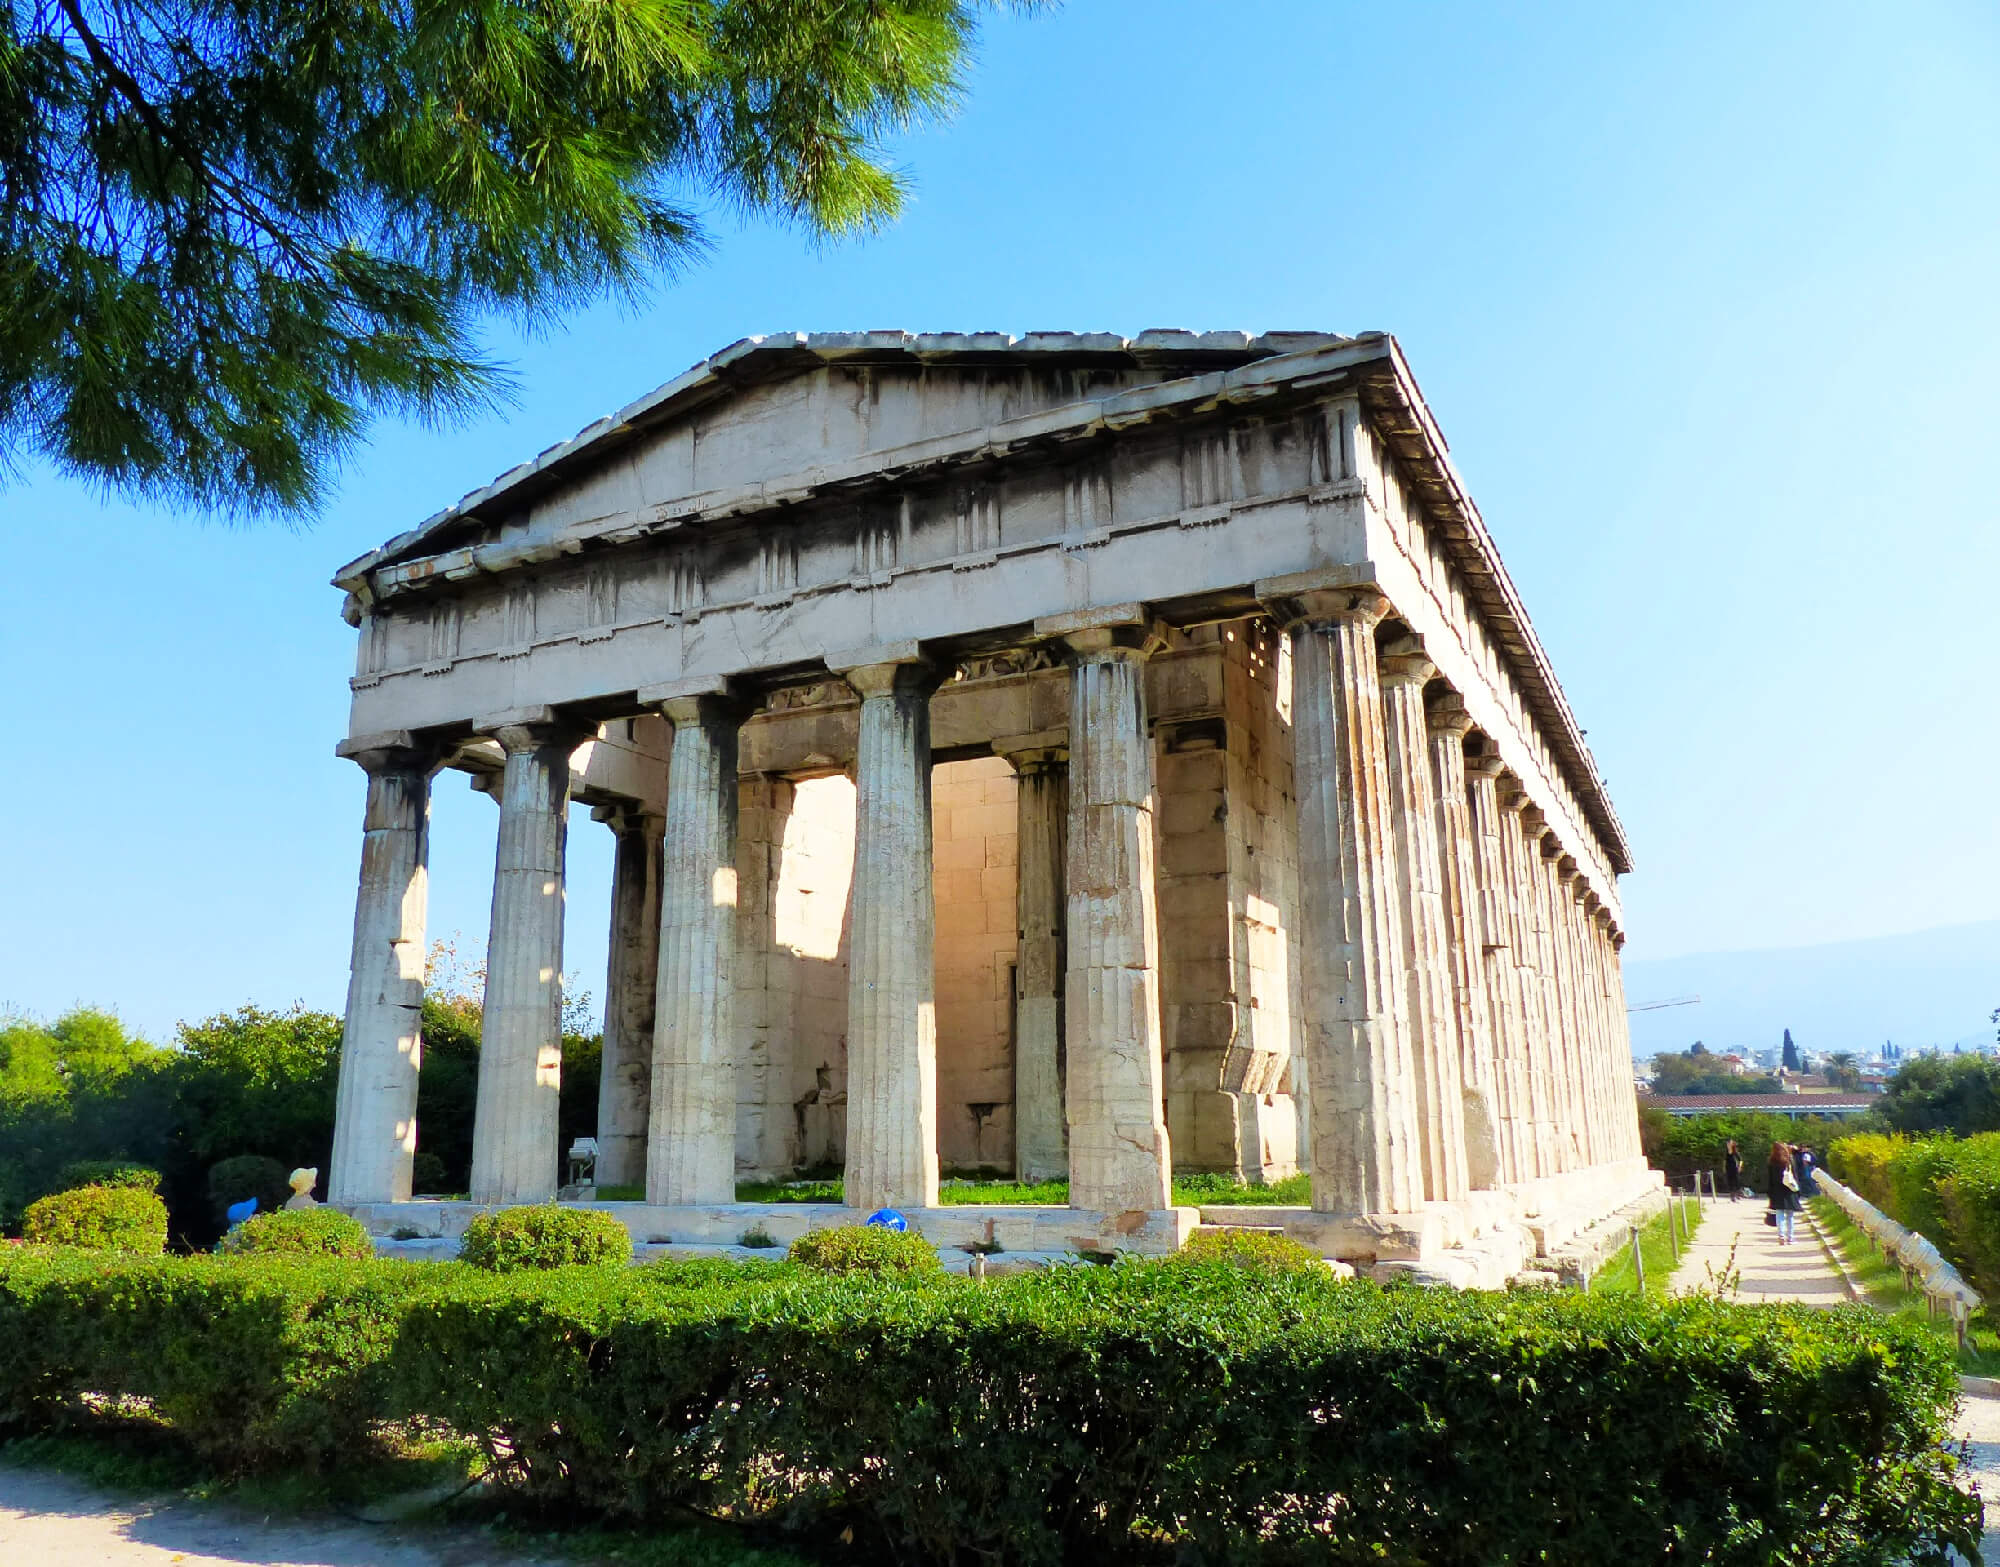 The Ancient Agora of Athens is worth seeing as you spend 3 days in Athens.